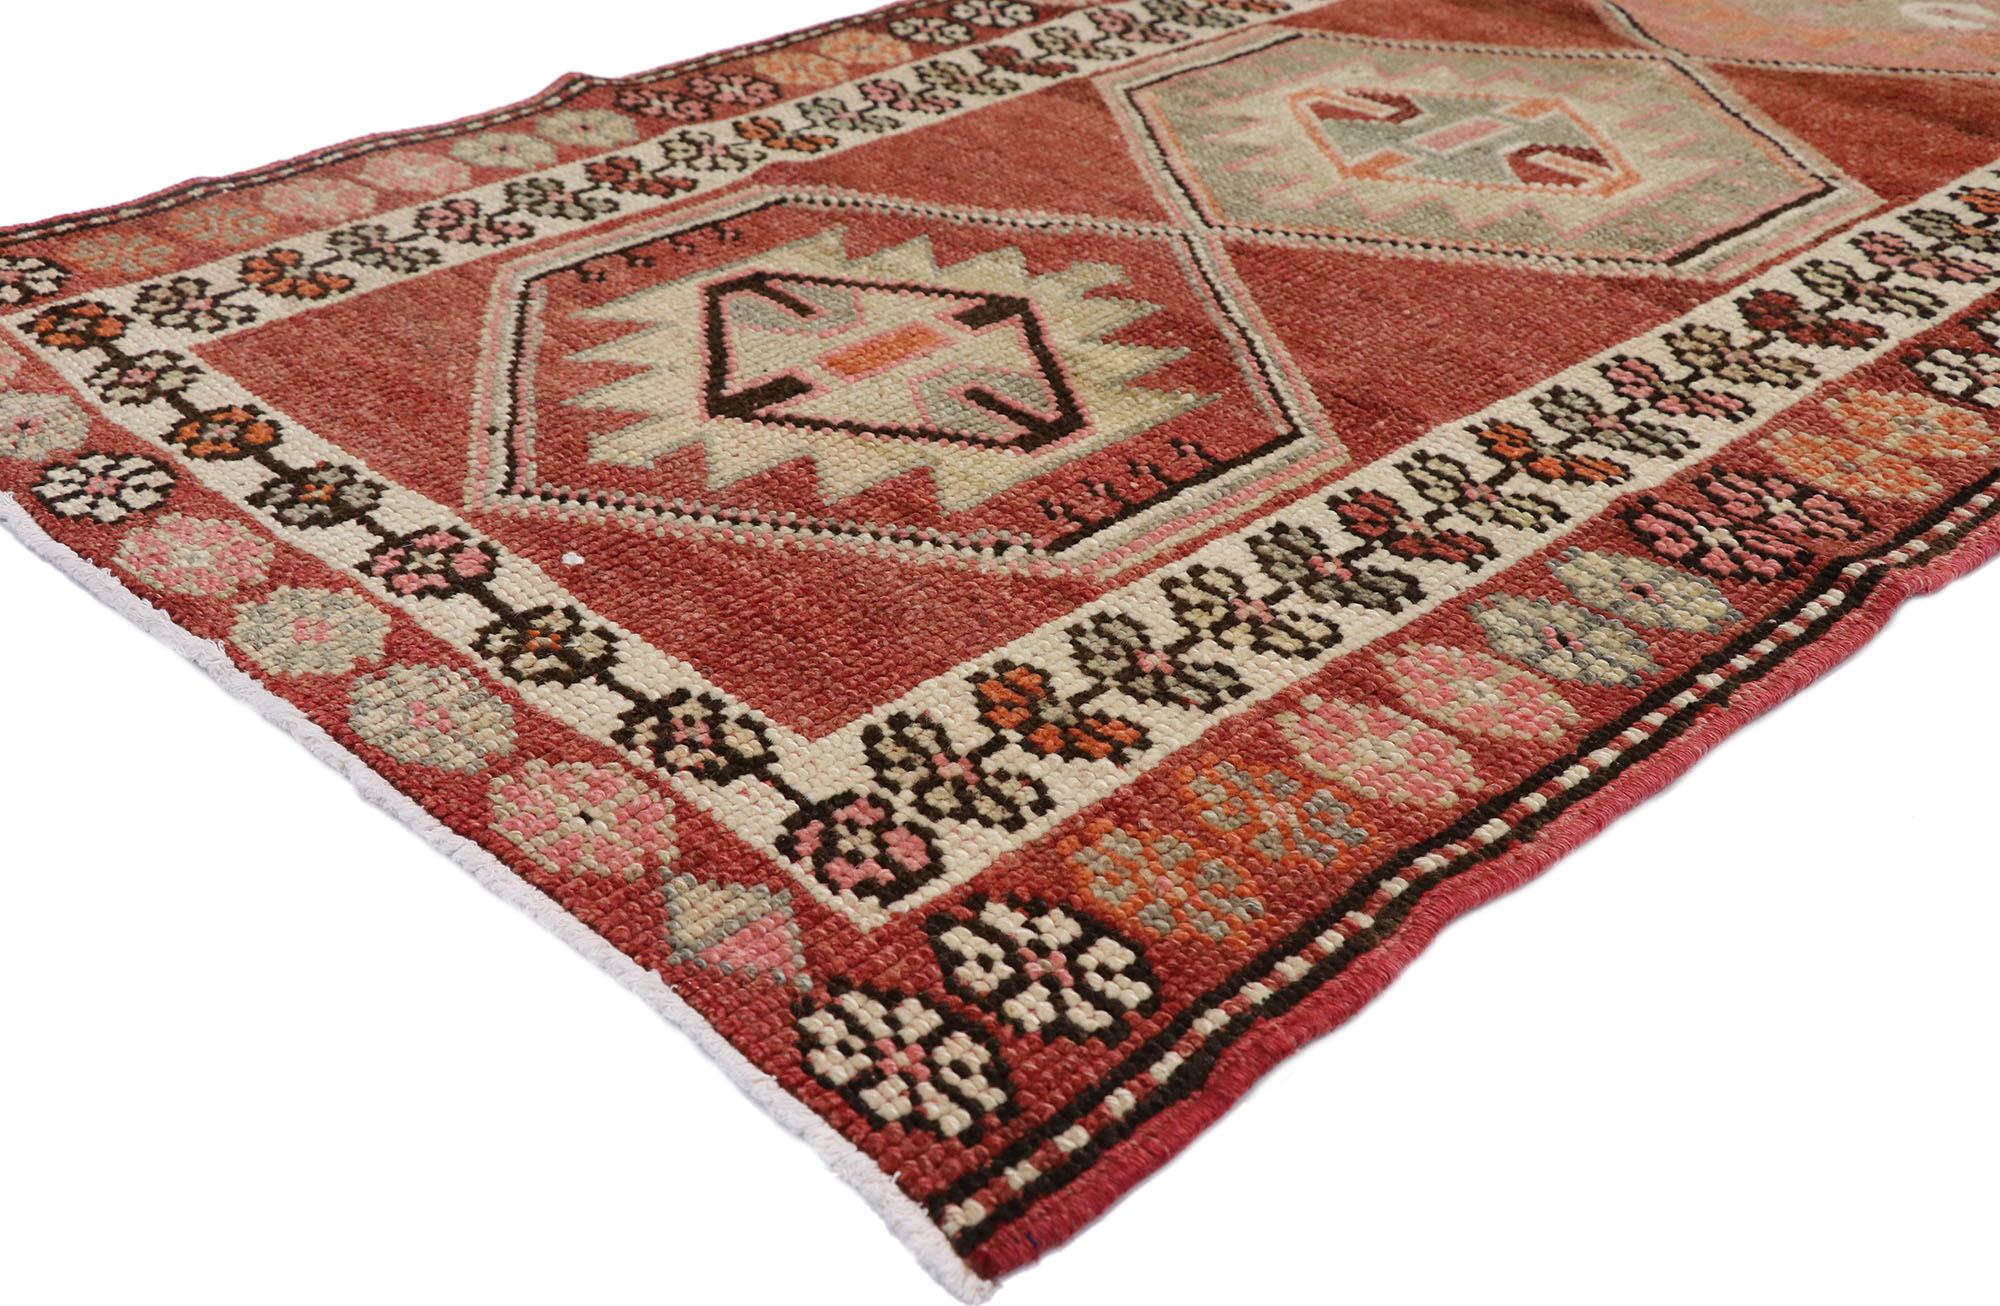 52716, vintage Turkish Oushak runner with warm Santa Fe Desert Tribal style. With its bold geometric form and Aztec flair combined with warm and vibrant colors, this hand knotted wool vintage Turkish Oushak runner manages to beautifully meld with